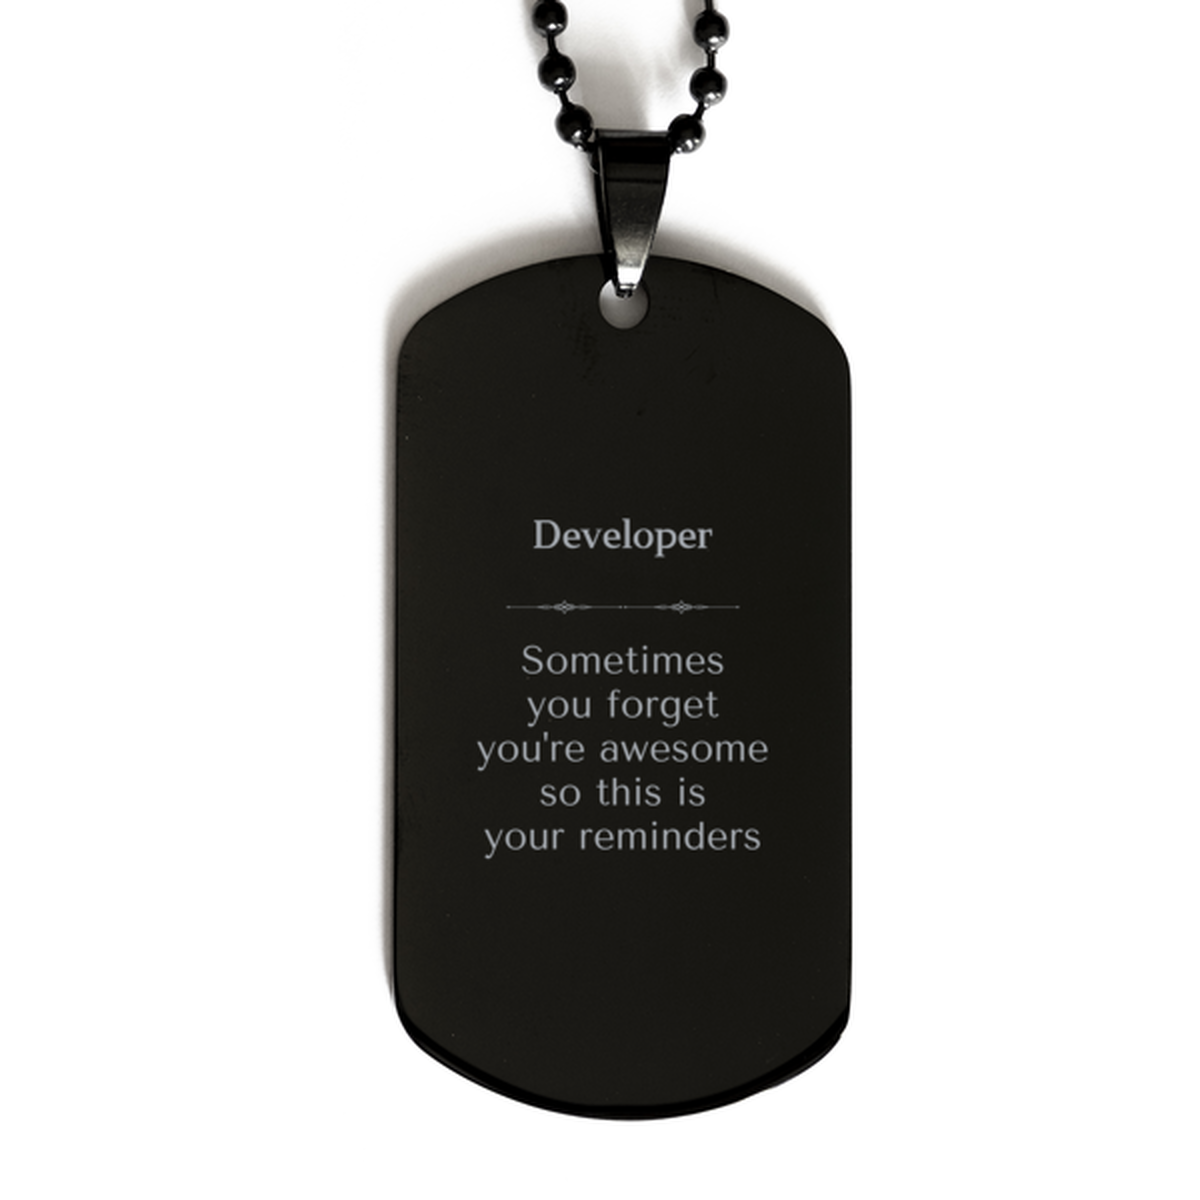 Sentimental Developer Black Dog Tag, Developer Sometimes you forget you're awesome so this is your reminders, Graduation Christmas Birthday Gifts for Developer, Men, Women, Coworkers